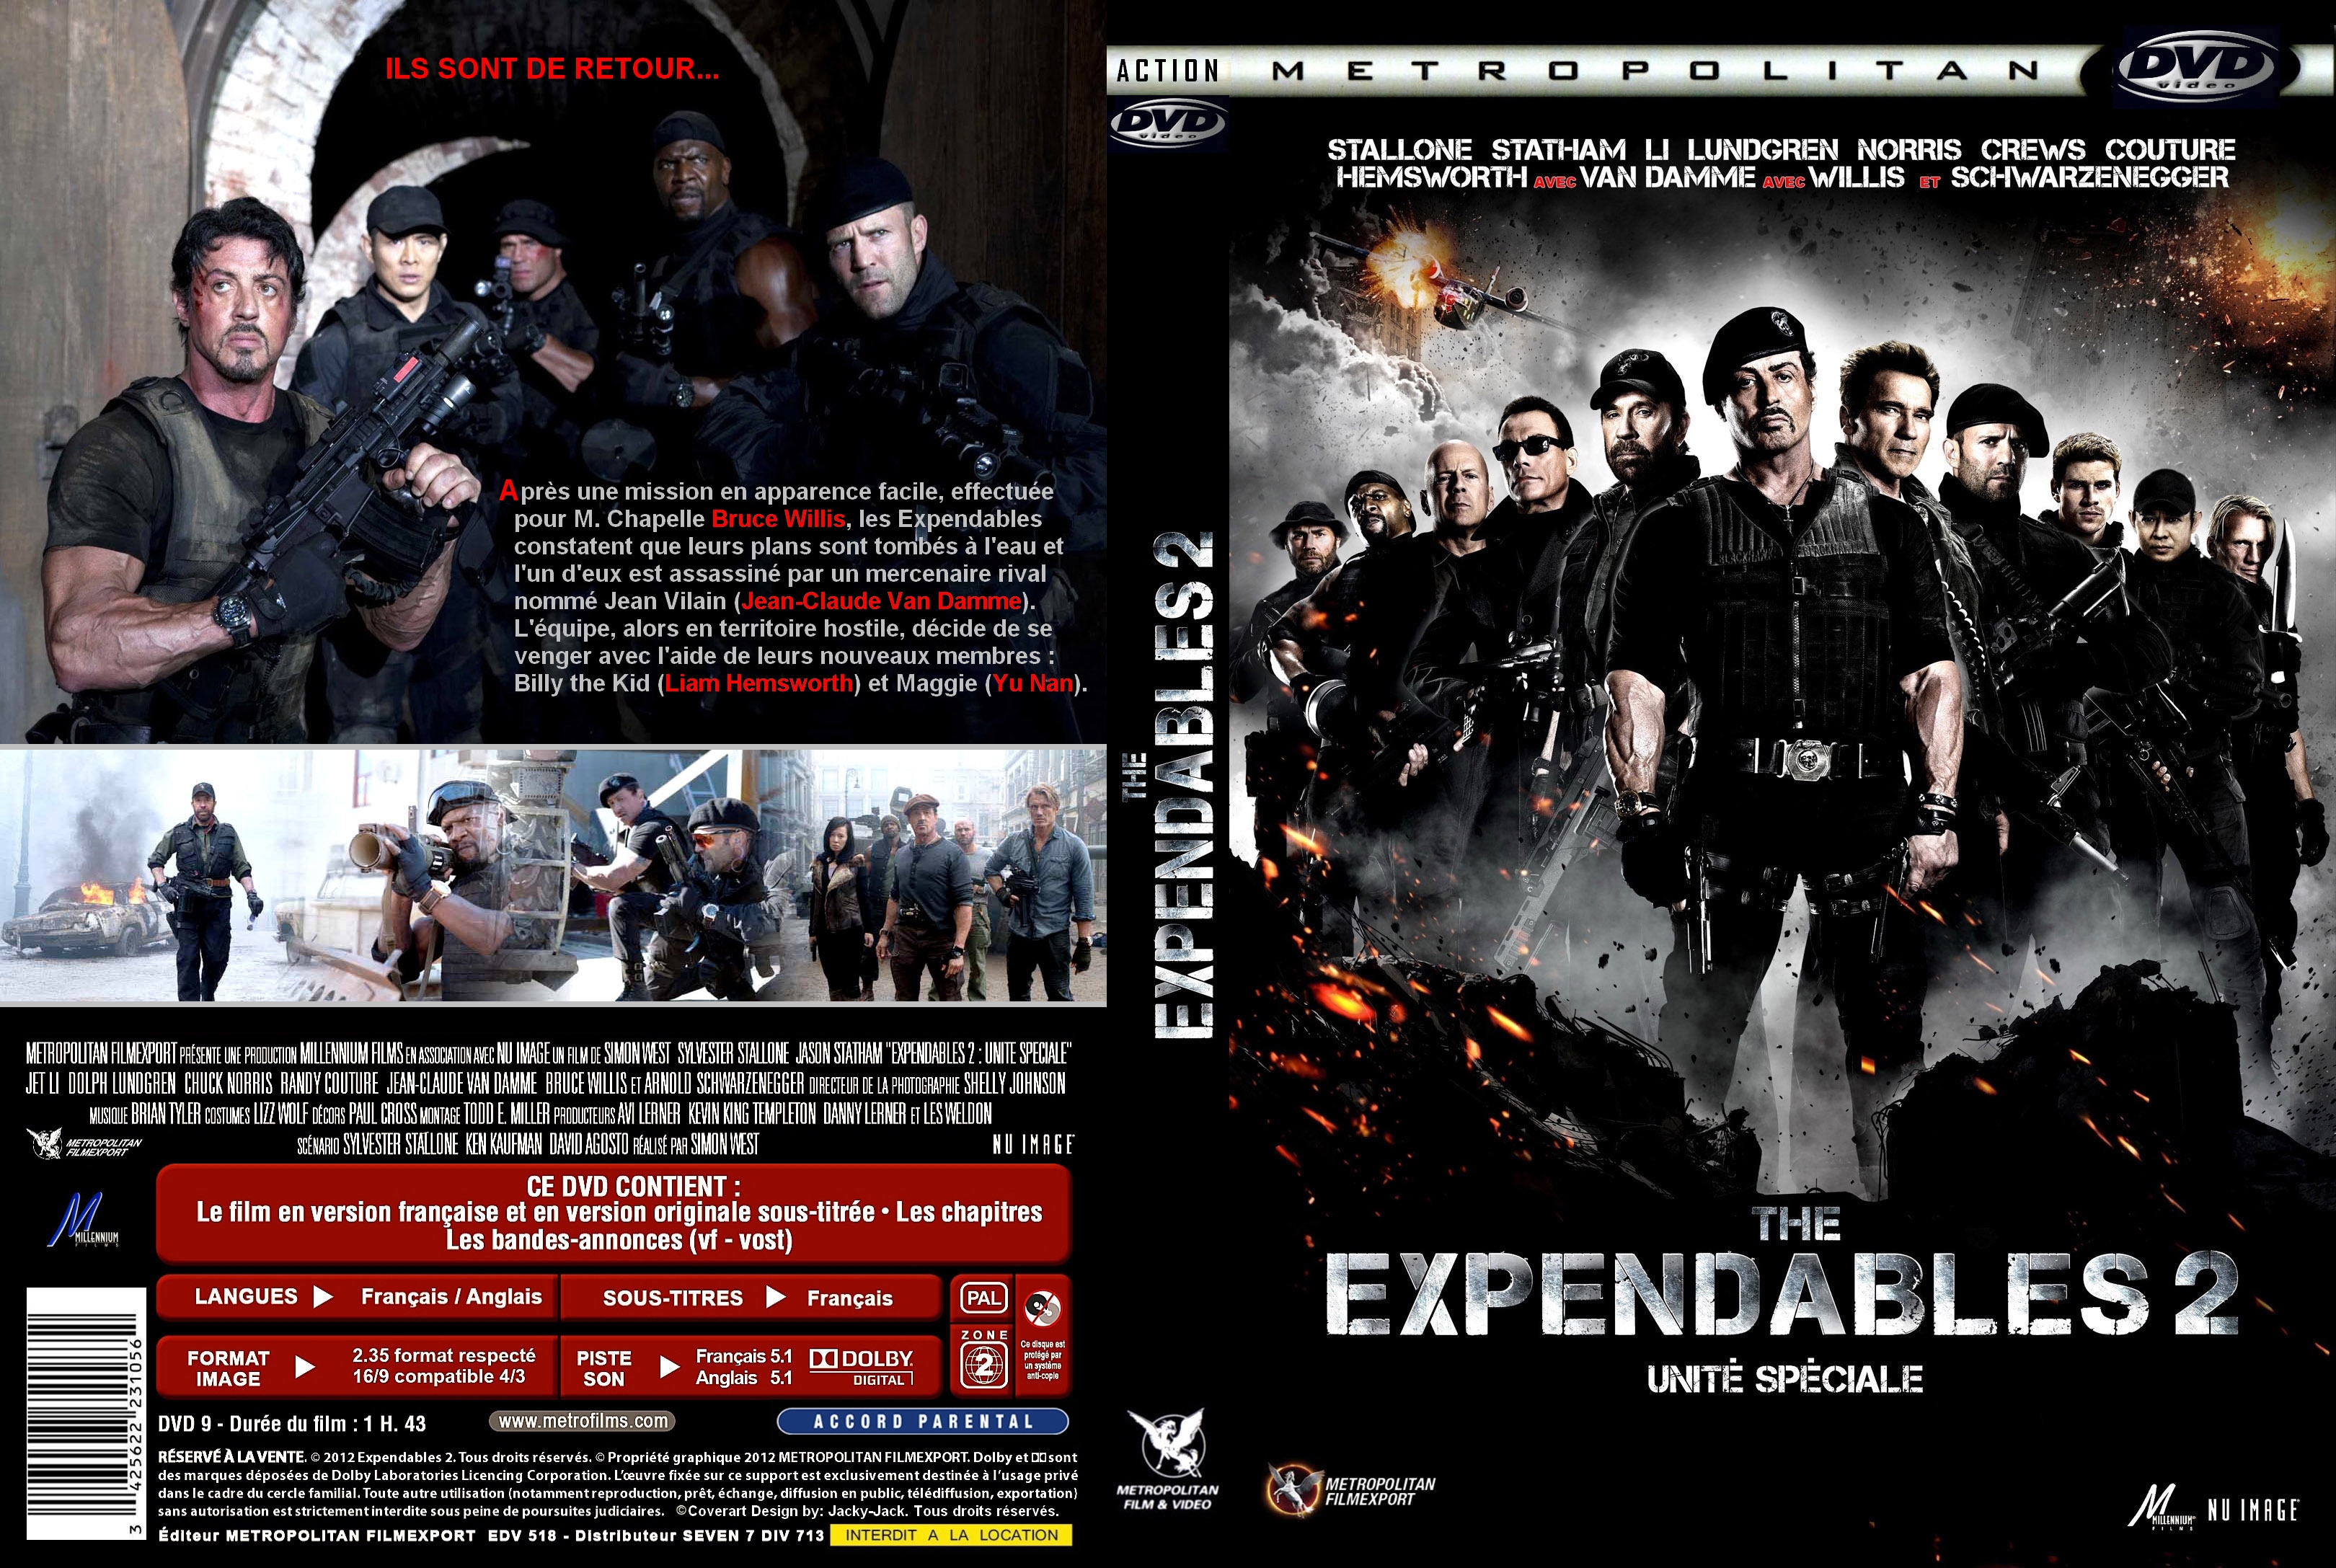 Jaquette DVD The Expendables 2 custom v2